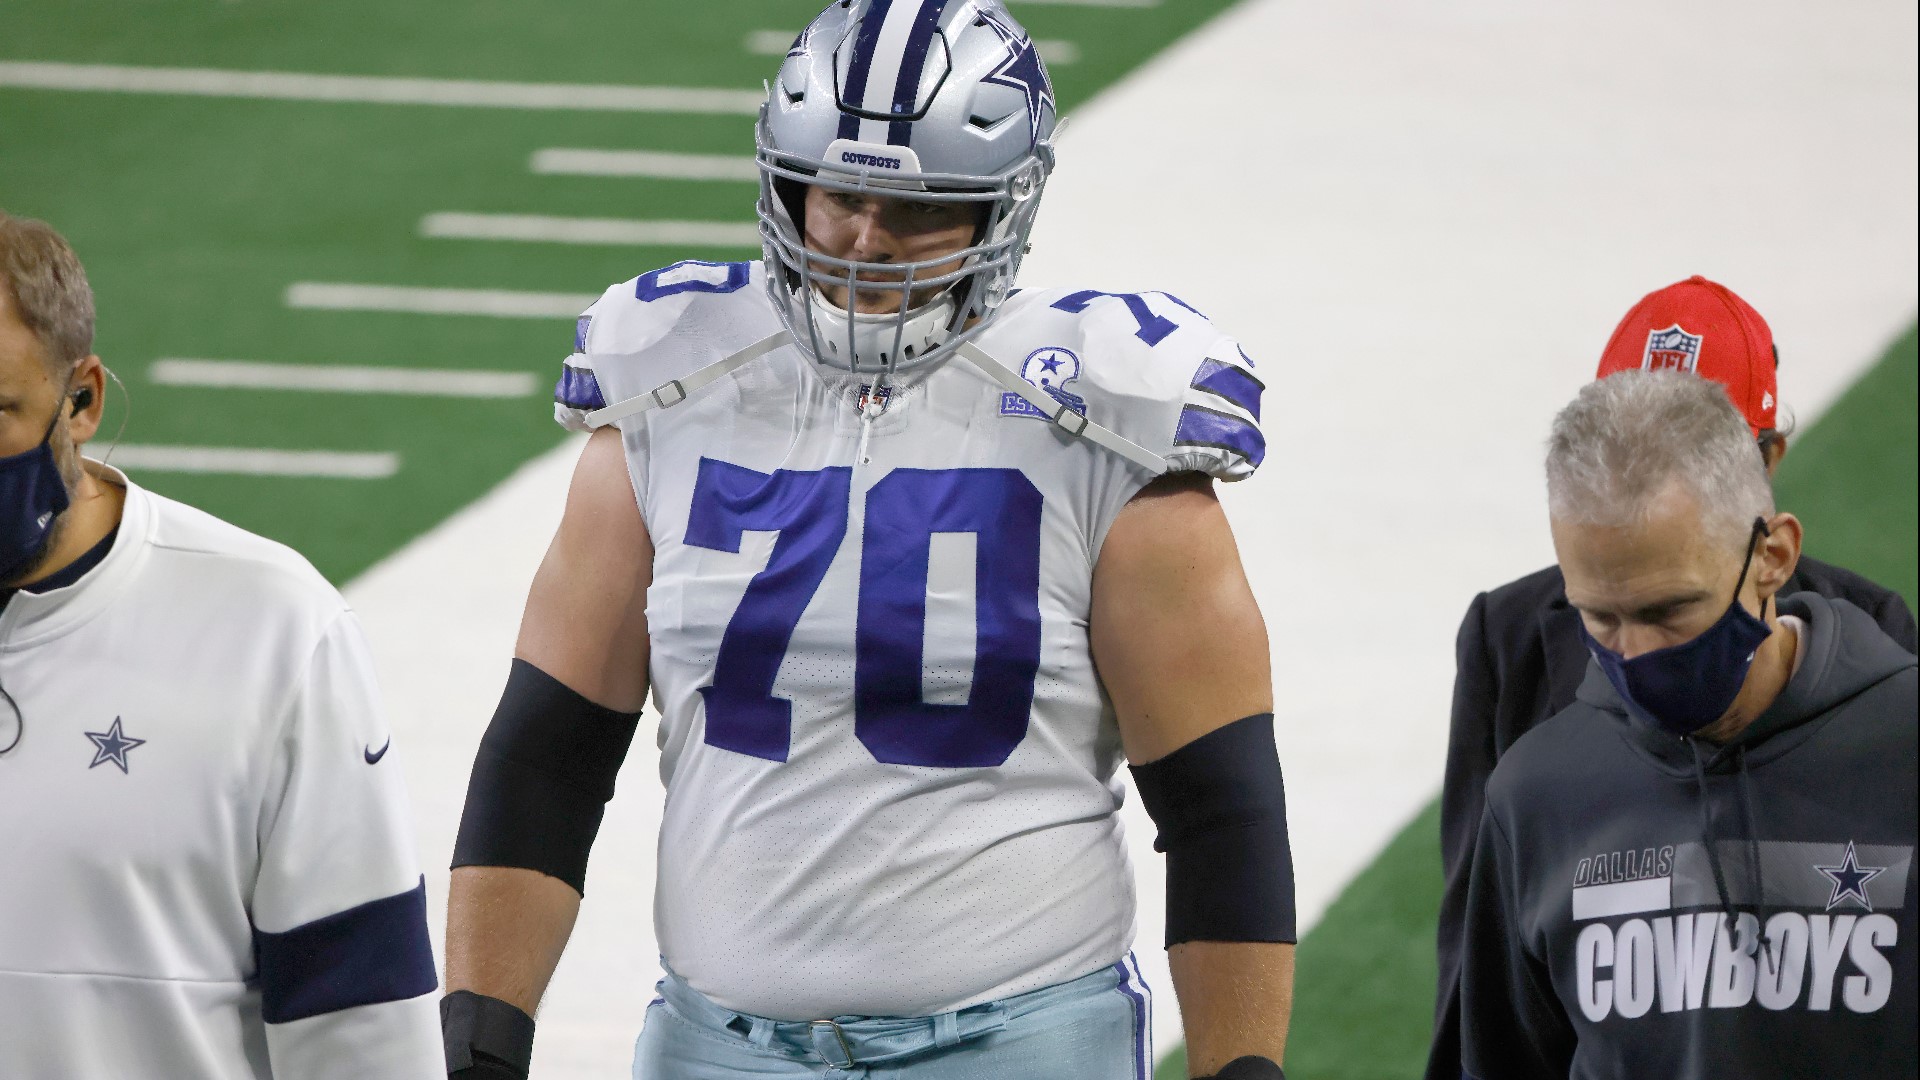 Coach Mike McCarthy on Sunday said offensive guard Zack Martin has been placed on the reserve/COVID-19 list.